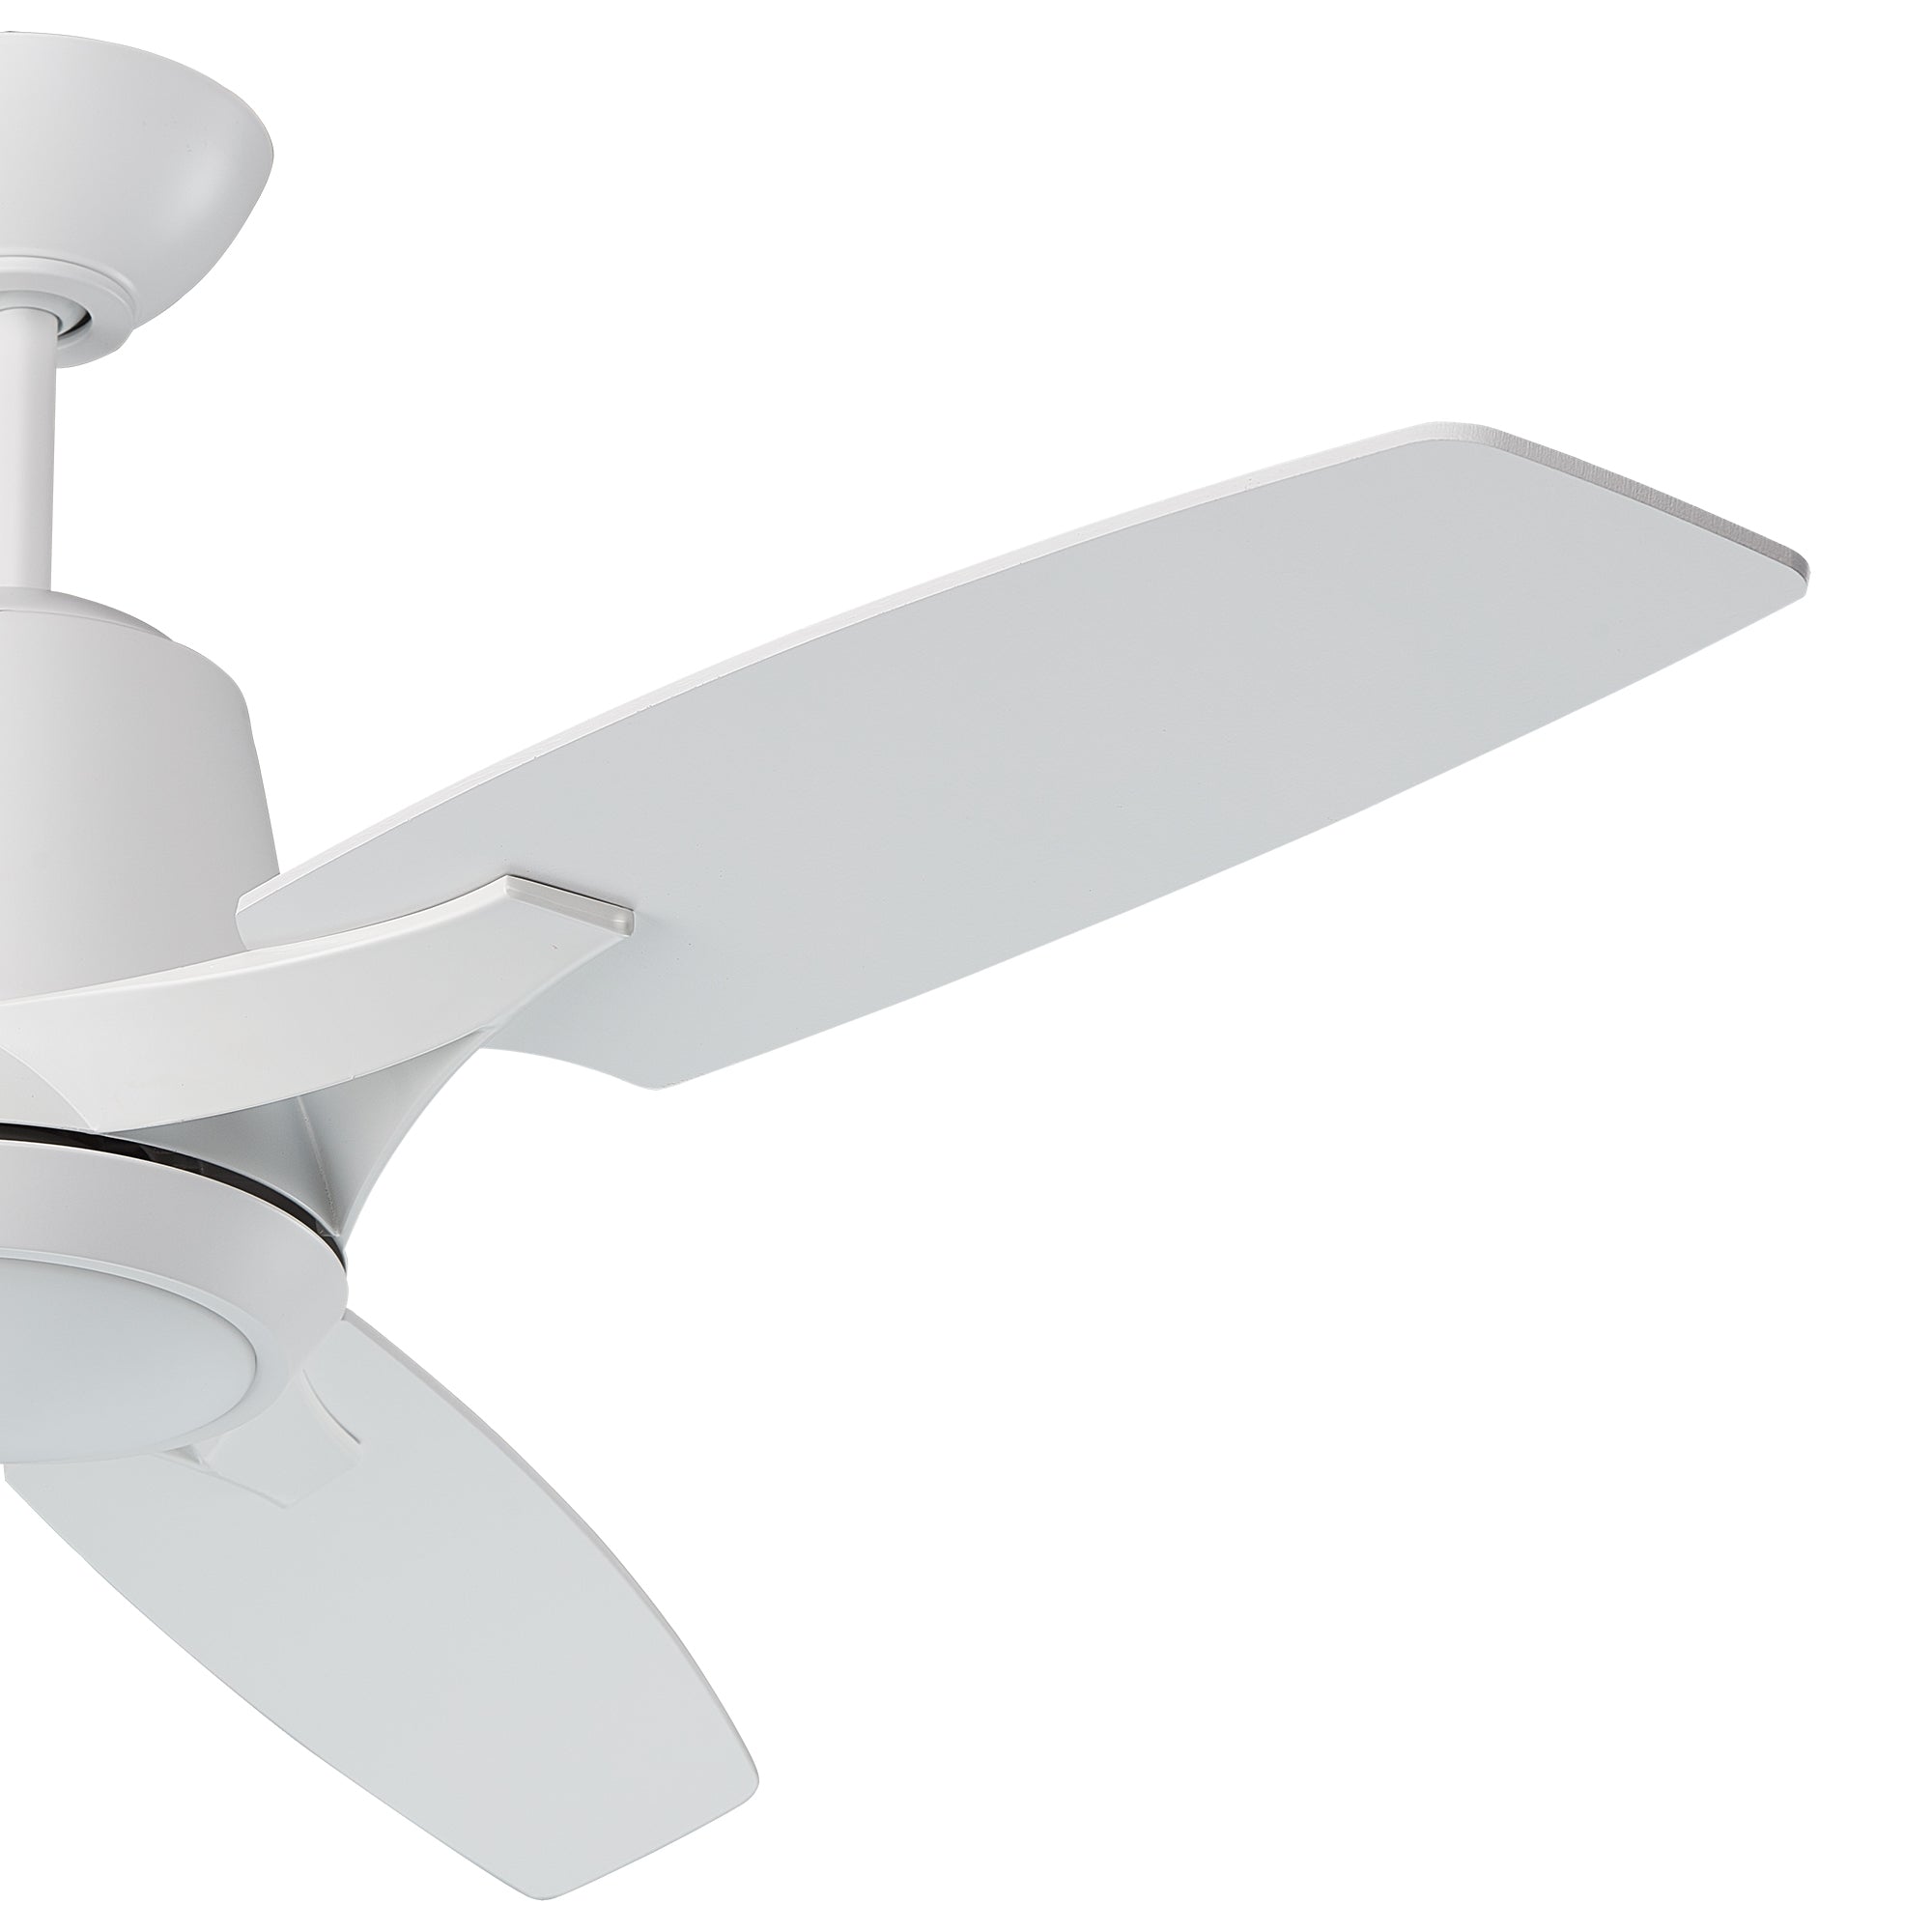 The Smafan Exton 52&#39;&#39; Smart Ceiling Fan keeps your space cool, bright, and stylish. It is a soft modern masterpiece perfect for your large indoor living spaces. This Wifi smart ceiling fan is a simplicity designing with Black finish, use elegant Plywood blades and compatible with LED Light. The fan features wall control, Wi-Fi apps, Siri Shortcut and Voice control technology (compatible with Amazon Alexa and Google Home Assistant ) to set fan preferences.